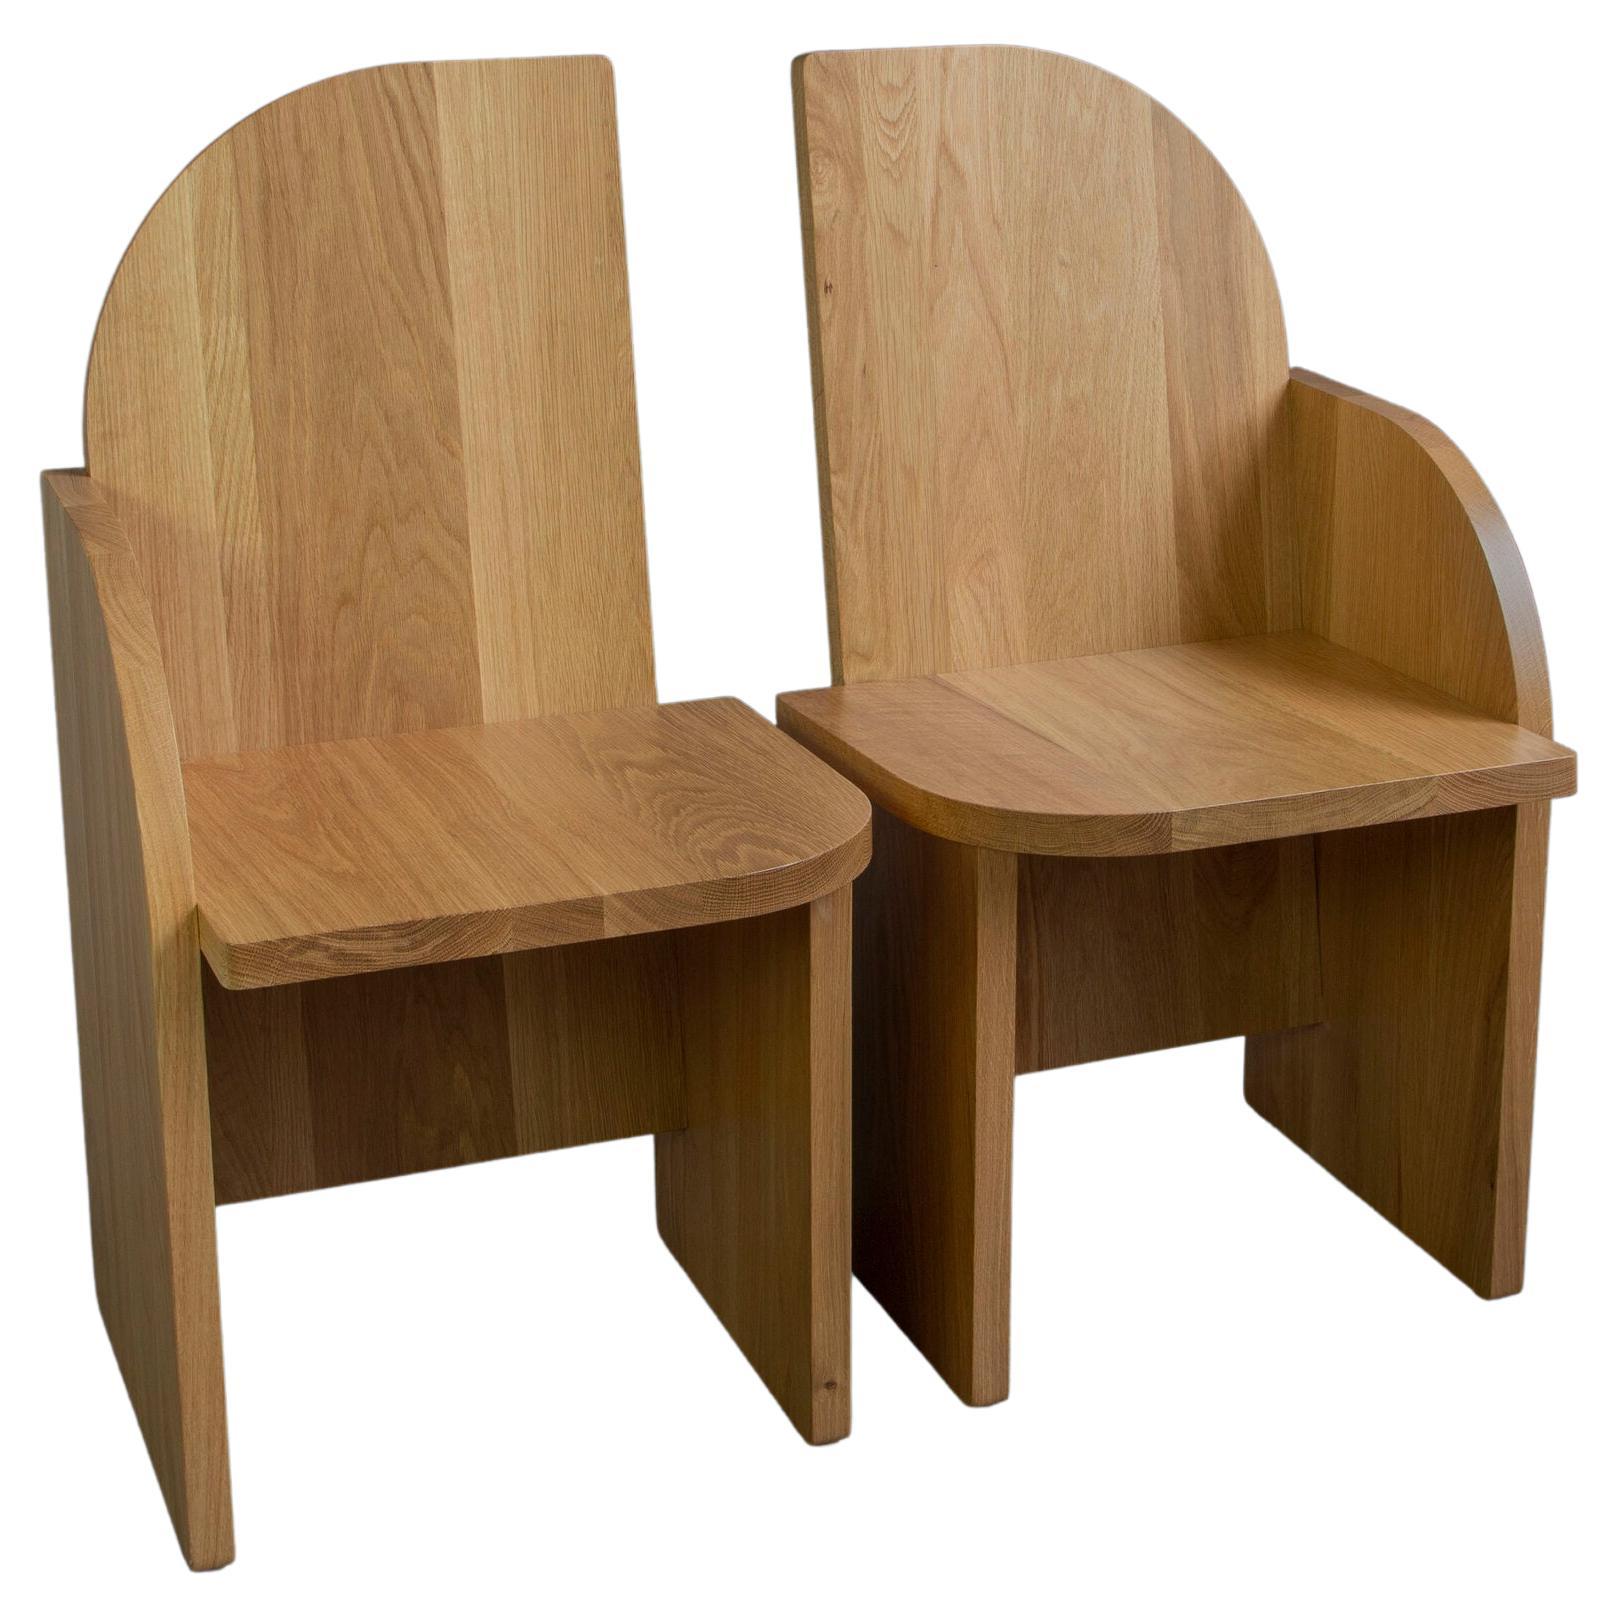 Pair of solid wood Bluff Side Chair, White Oak, Sculptural Accent Chair, Seating For Sale